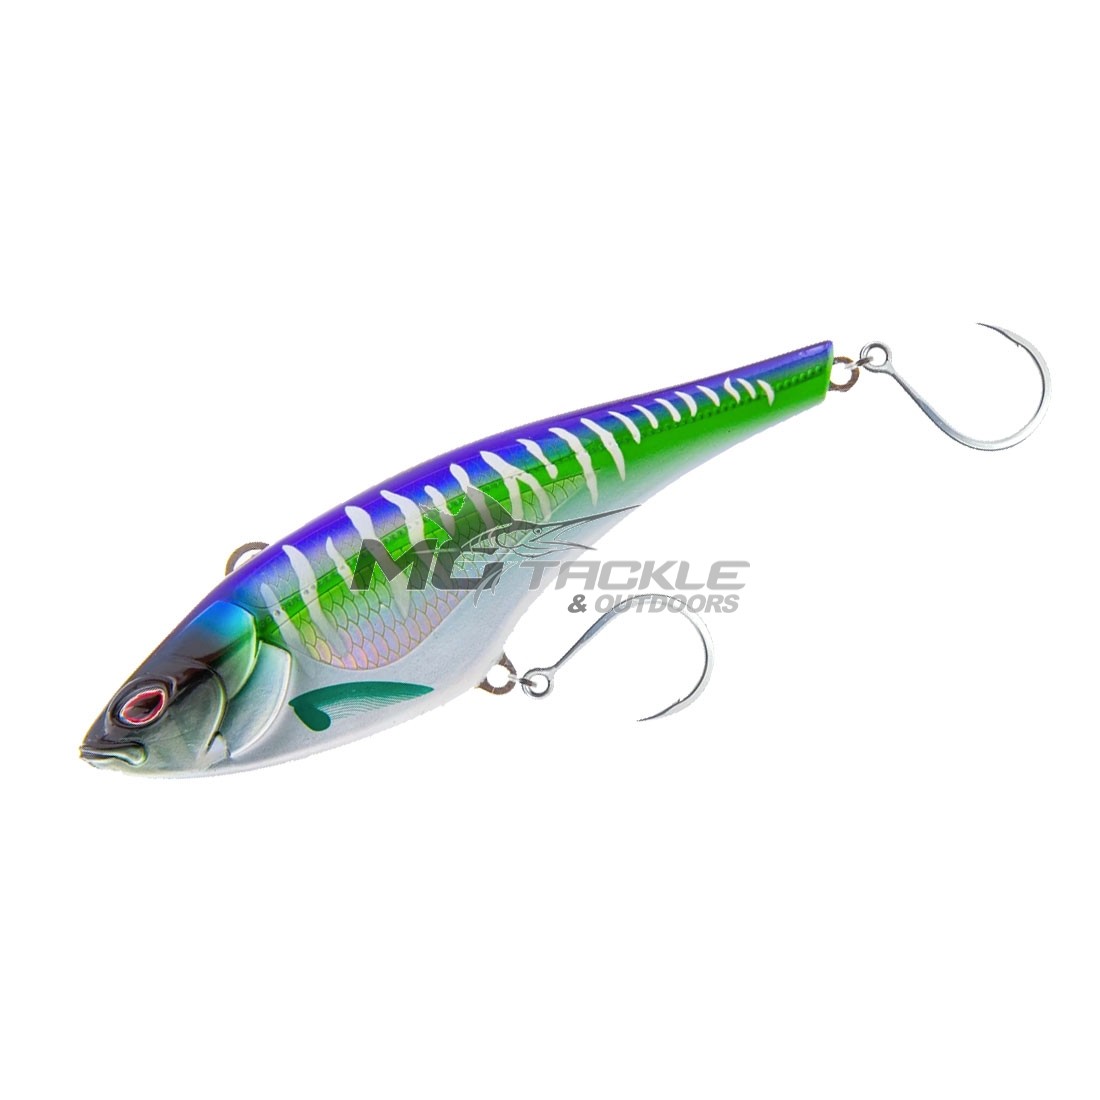 Nomad Madmacs Lure  MoTackle & Outdoors